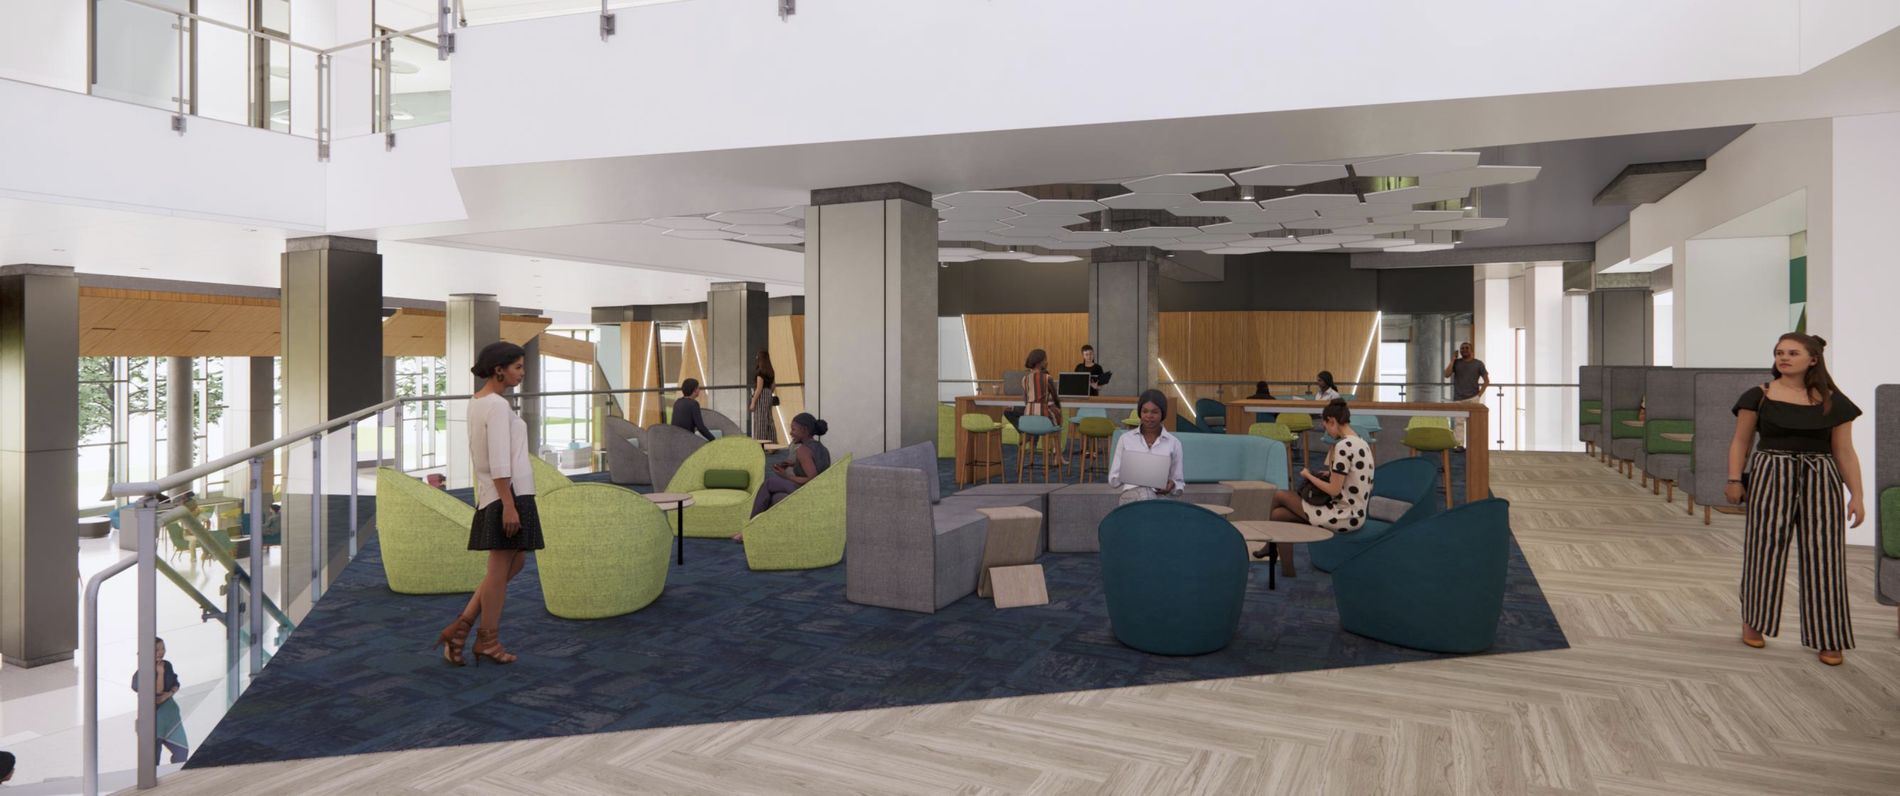 Architectural rendering of the mezzanine area in the renovated Paley Hall